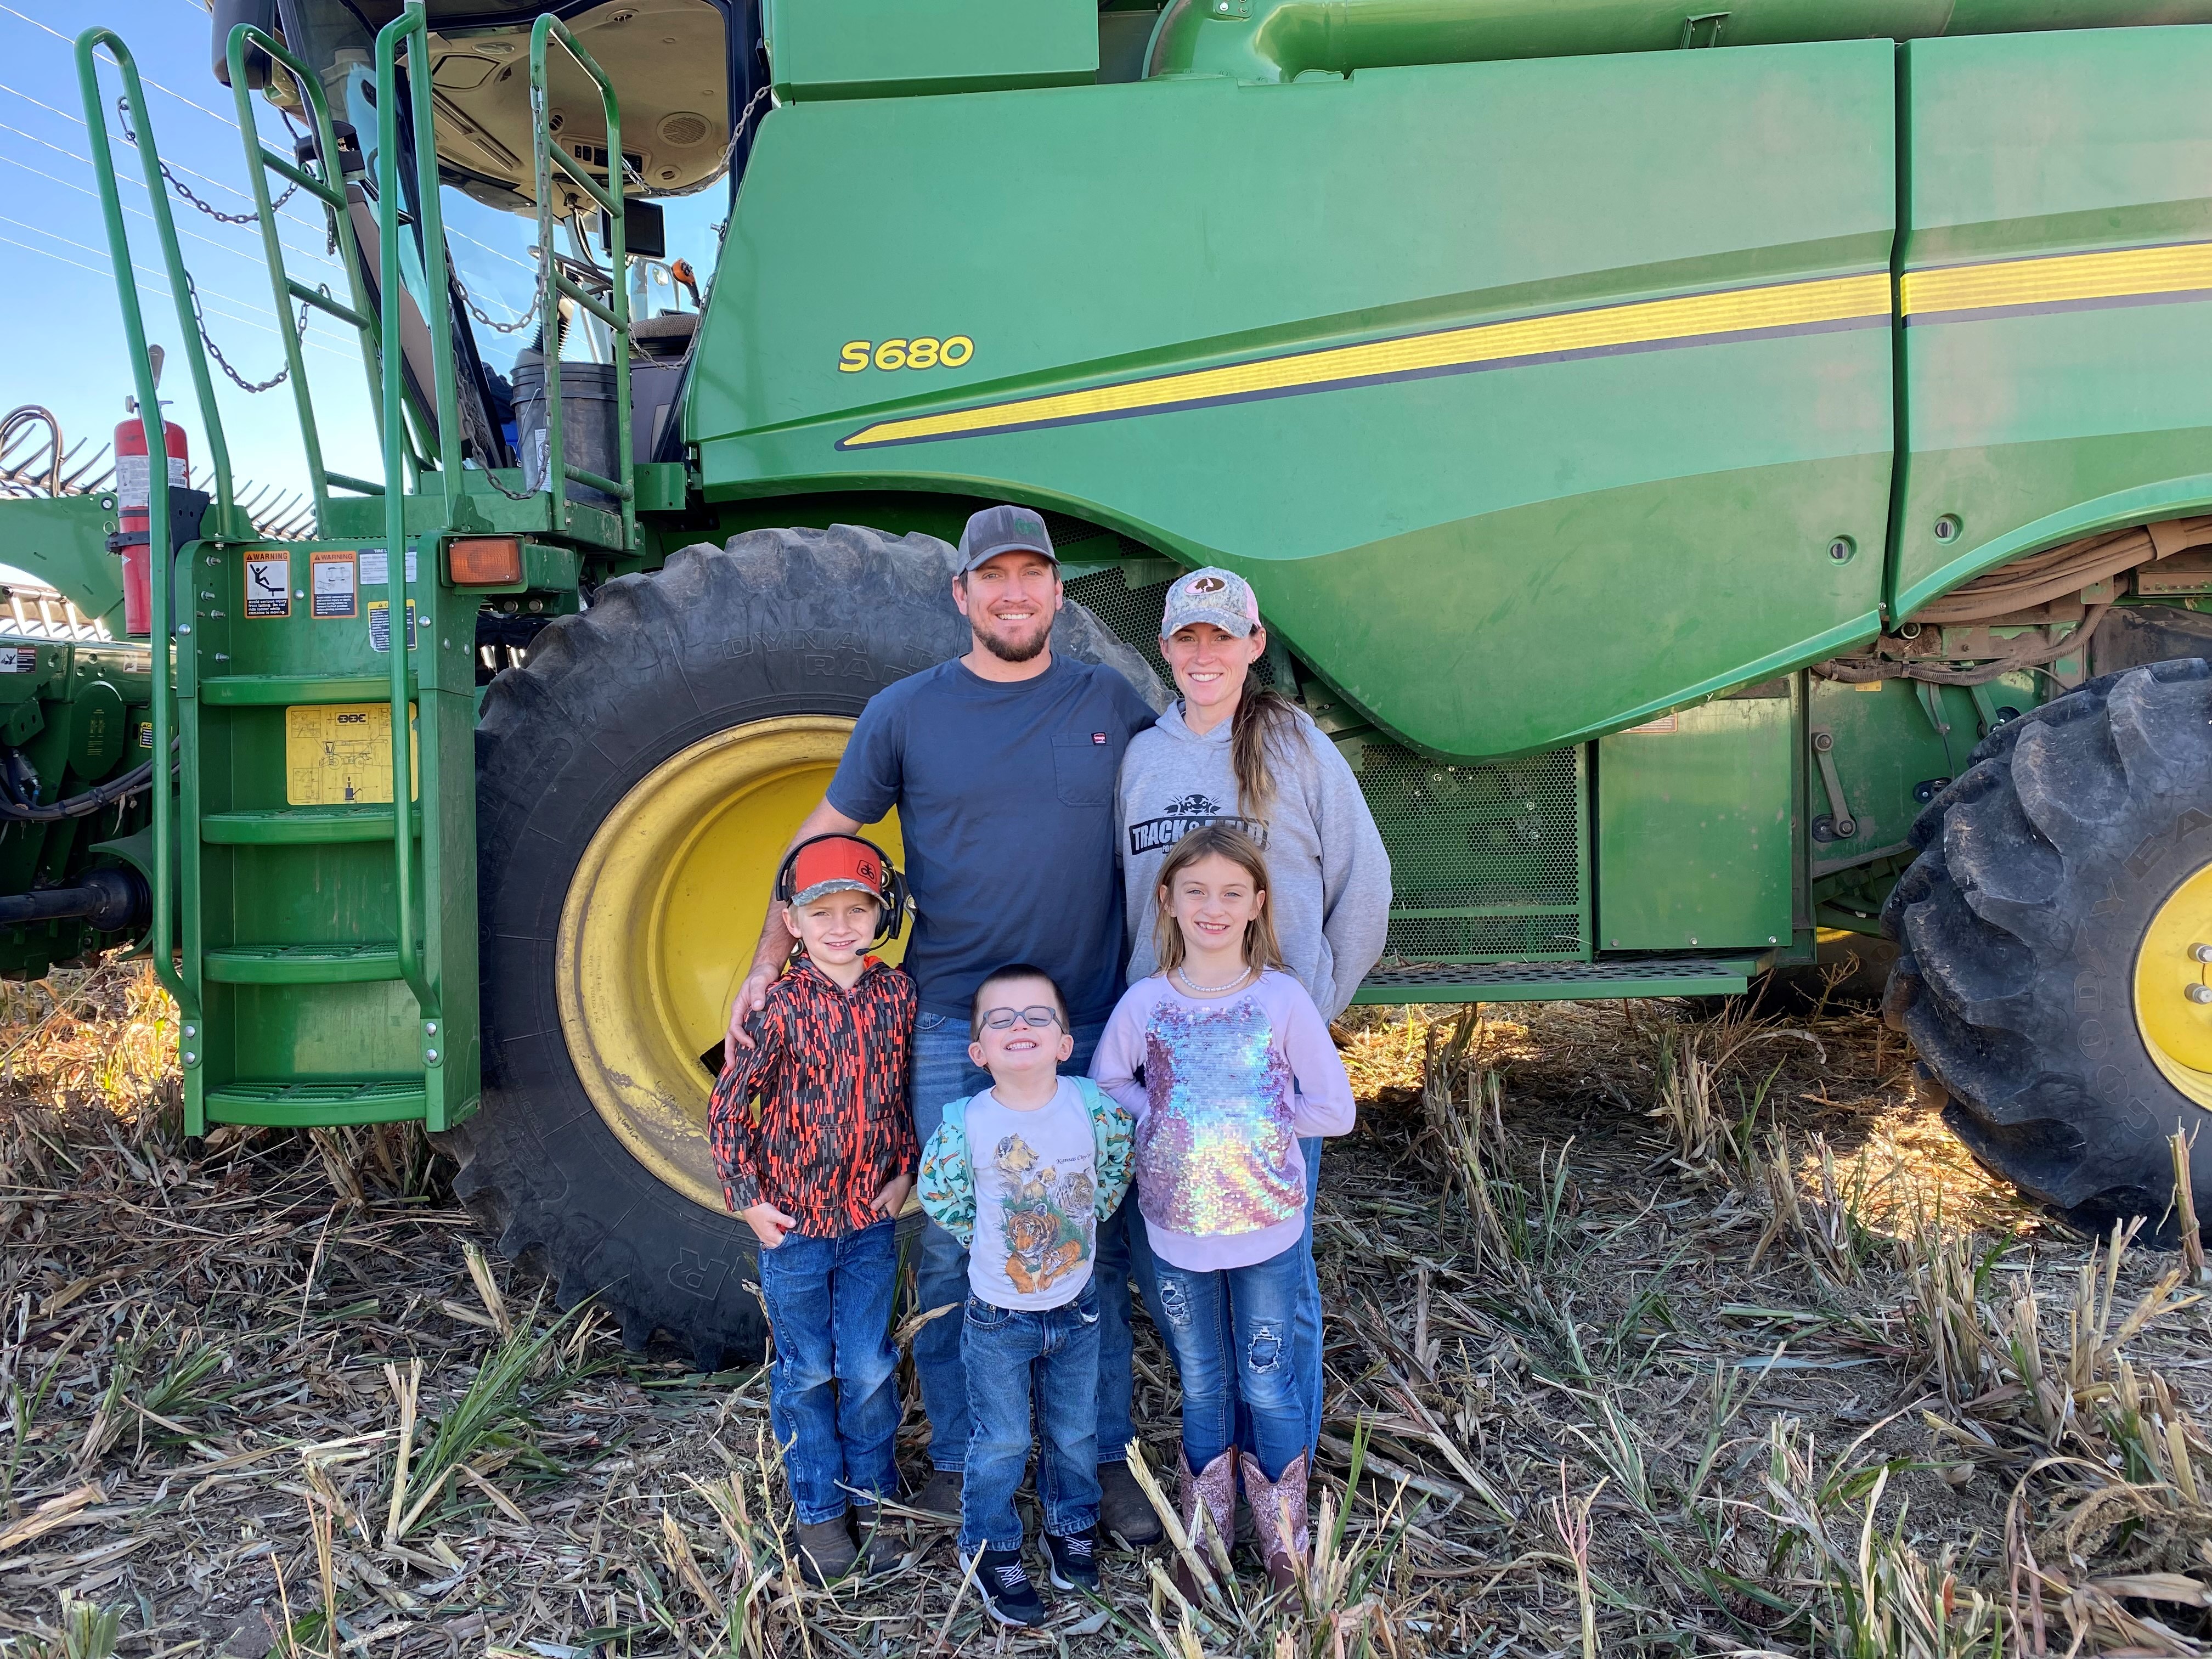 A family with three young children stand in front of a large green piece of farm equipment in the middle of a field.